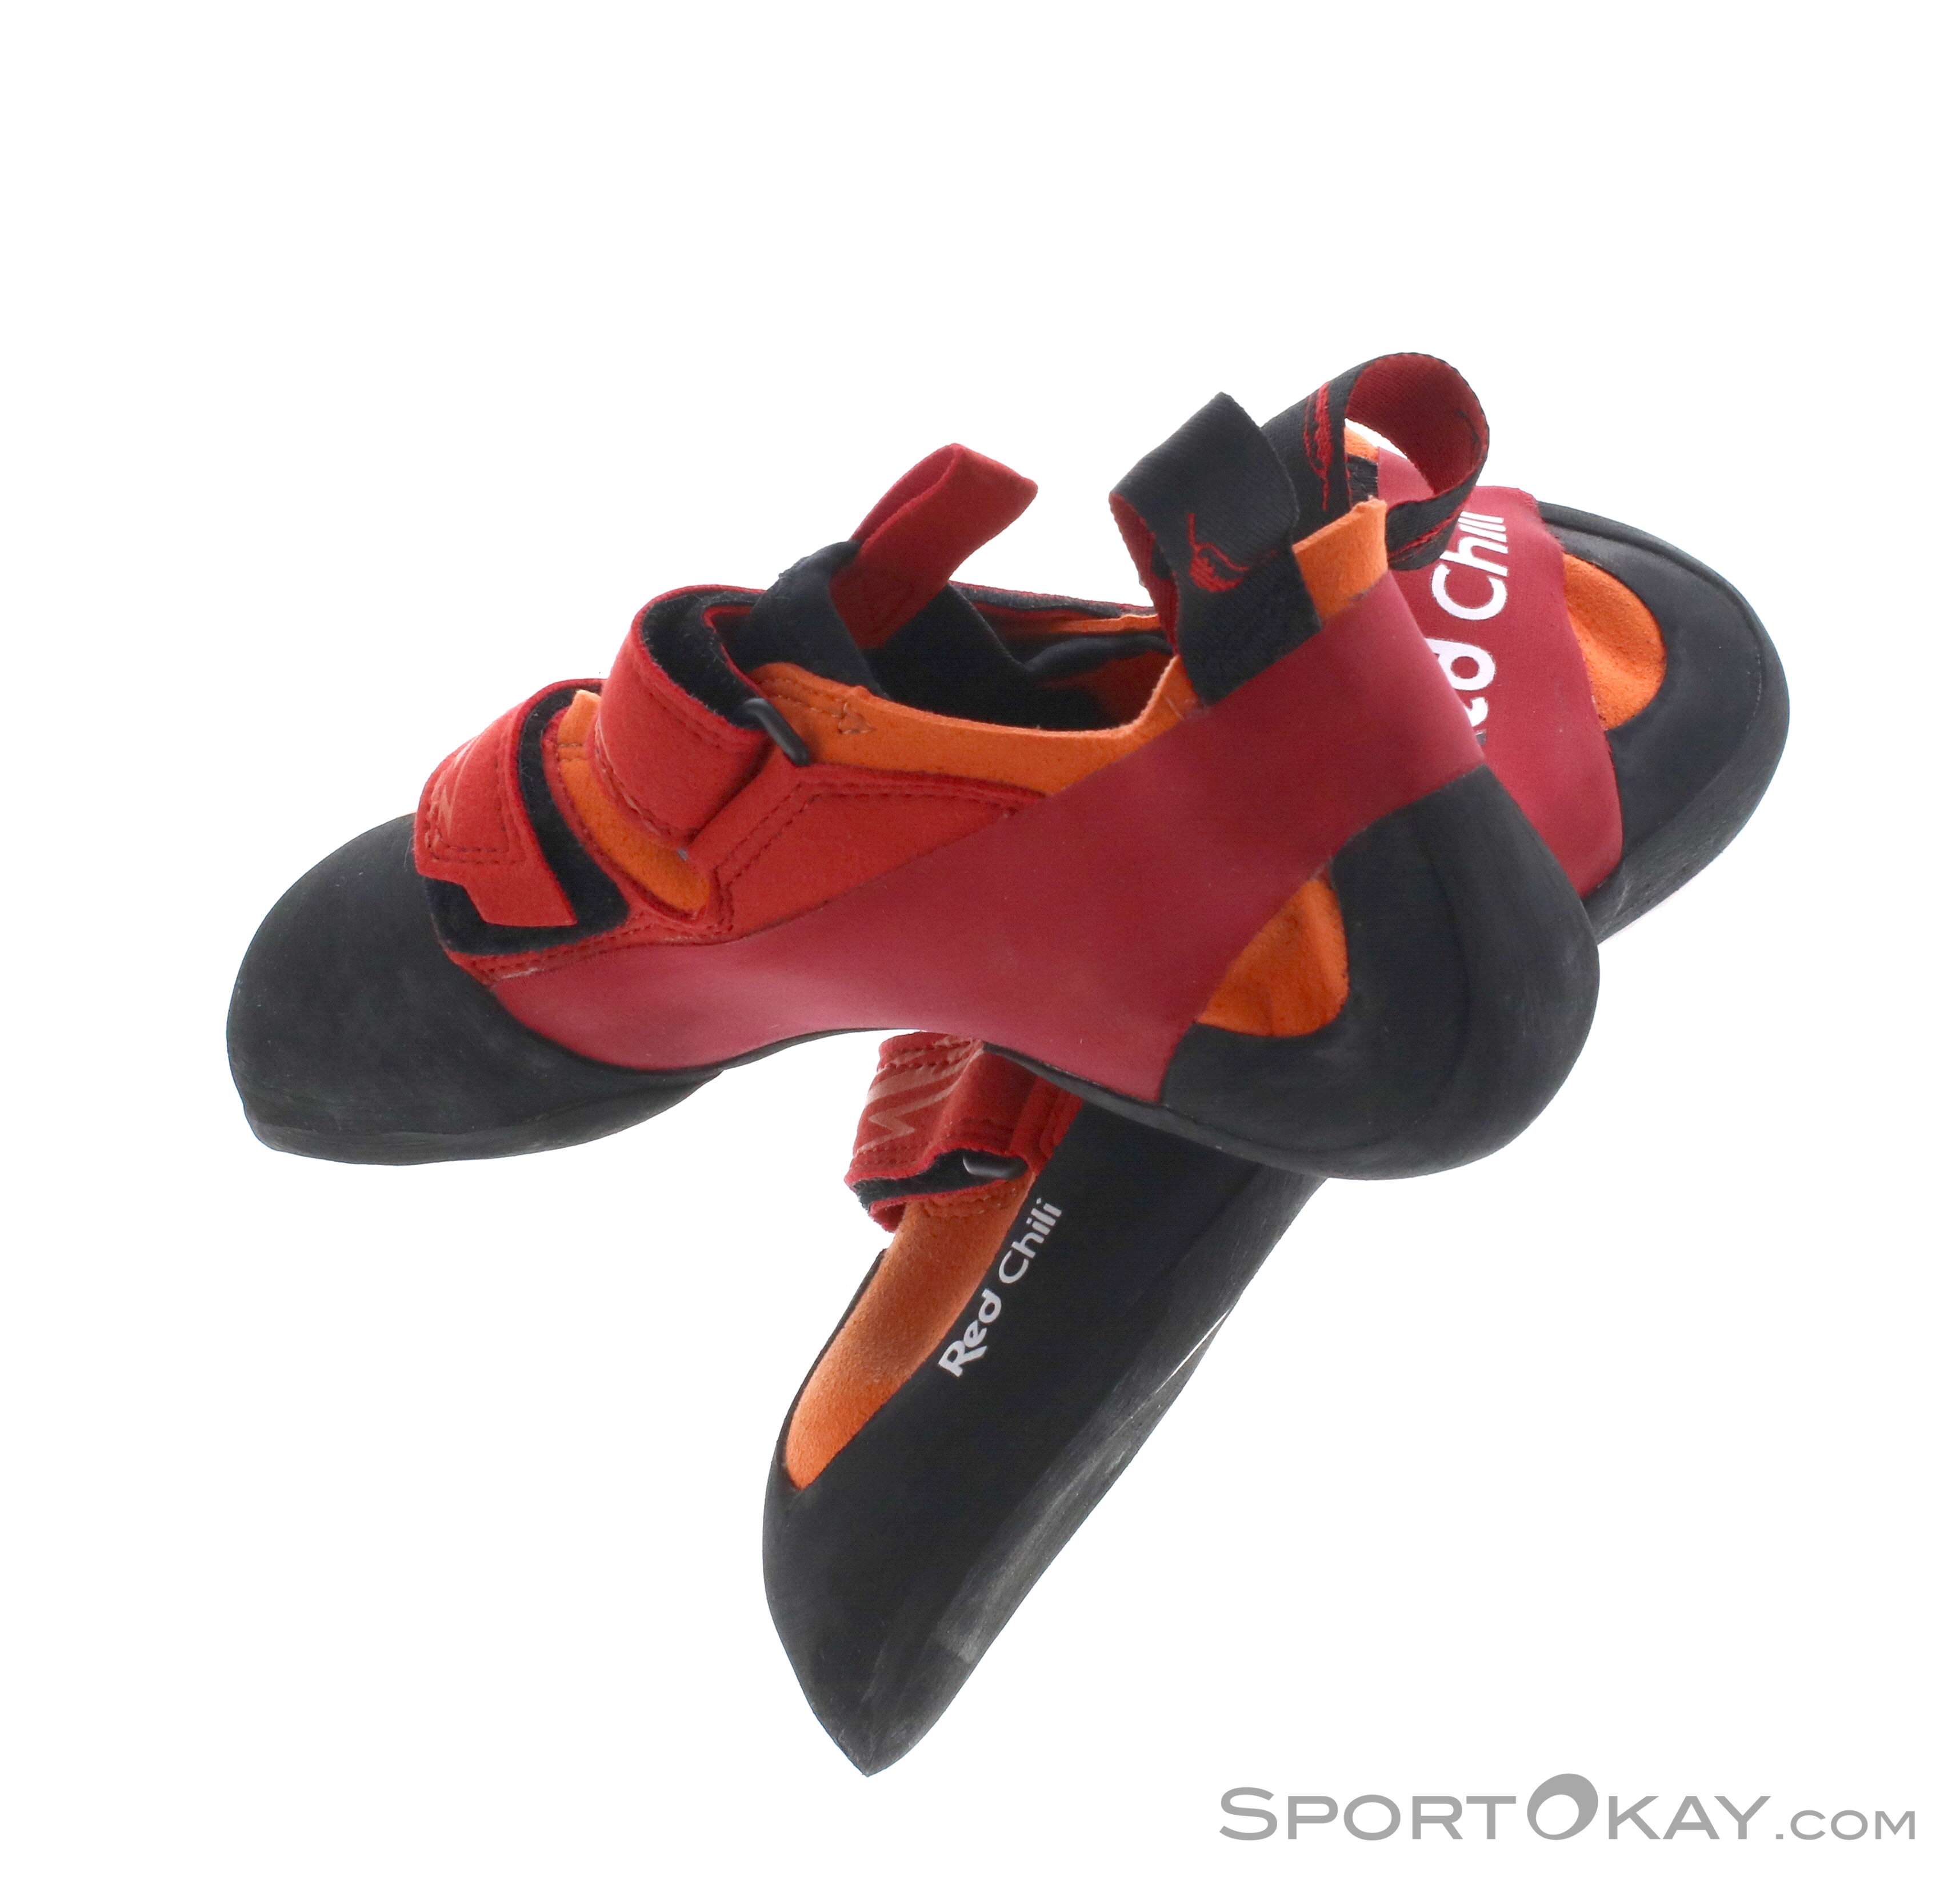 Red Chili Voltage LV - Climbing shoes, Buy online